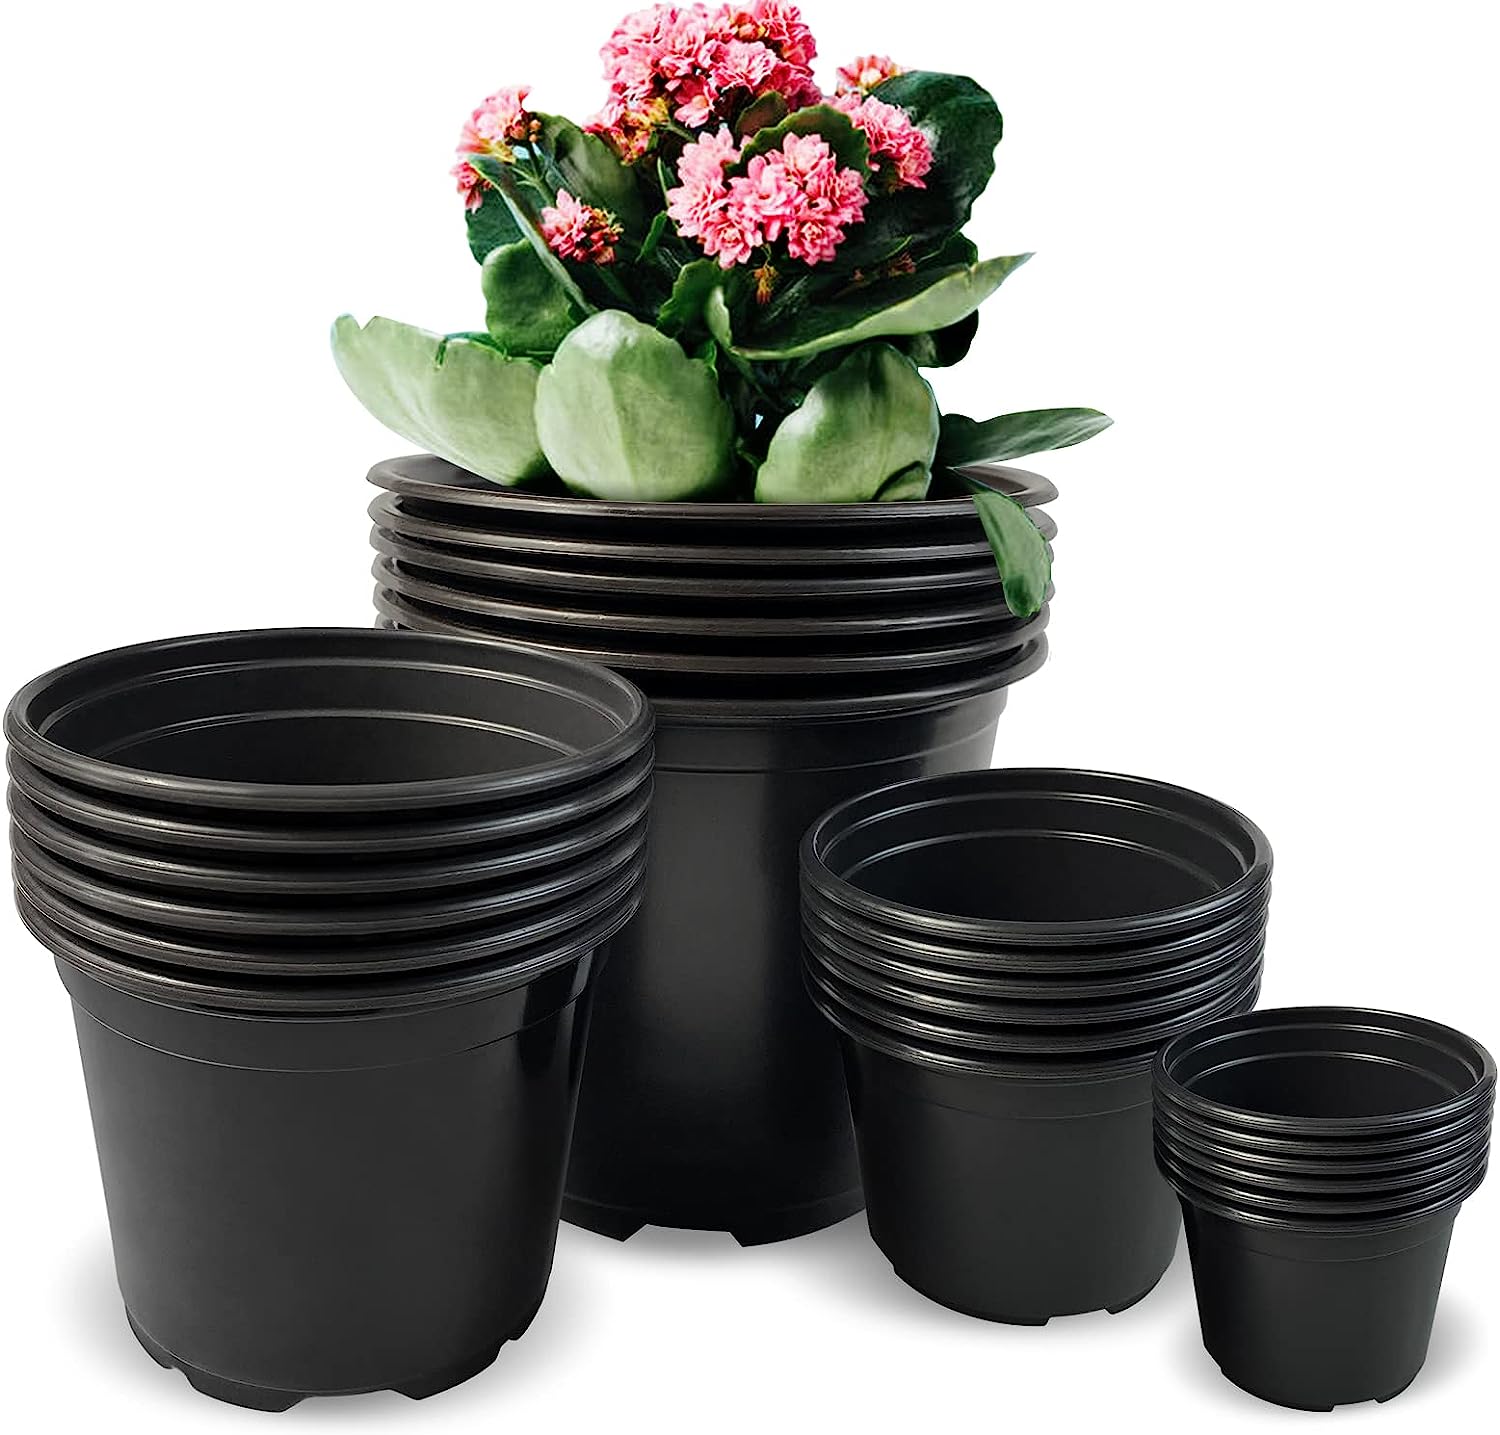 Leafy Tales Plastic Pot - Lightweight, Strong